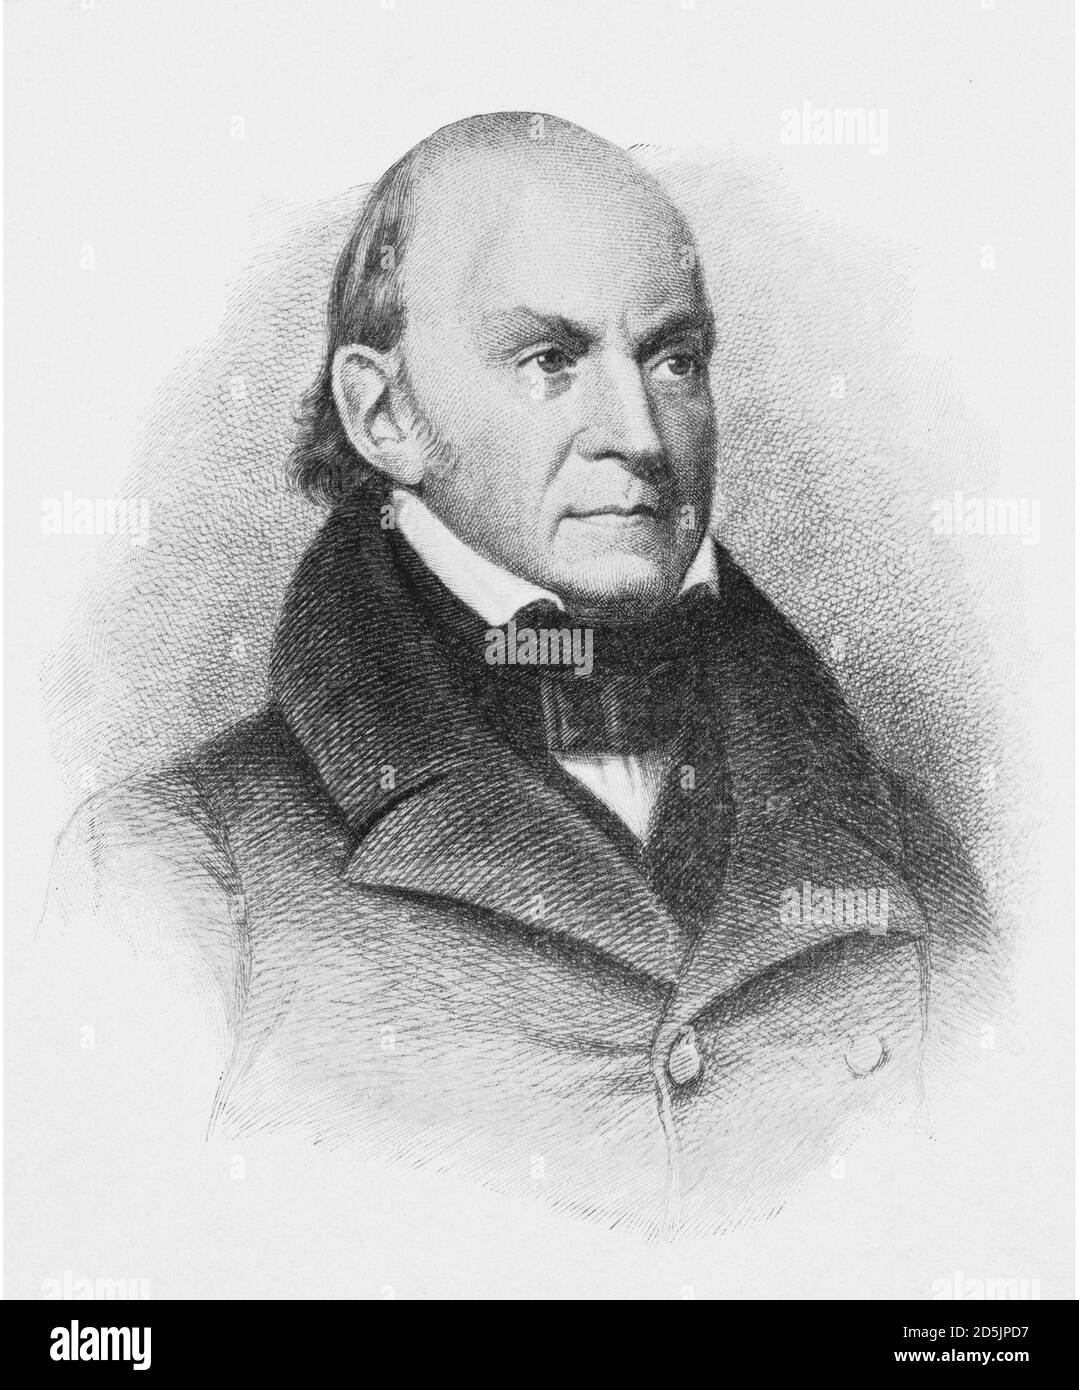 Portrait of president John Quincy Adams. John Quincy Adams (1767 – 1848) was an American statesman, diplomat, lawyer, and diarist who served as the si Stock Photo